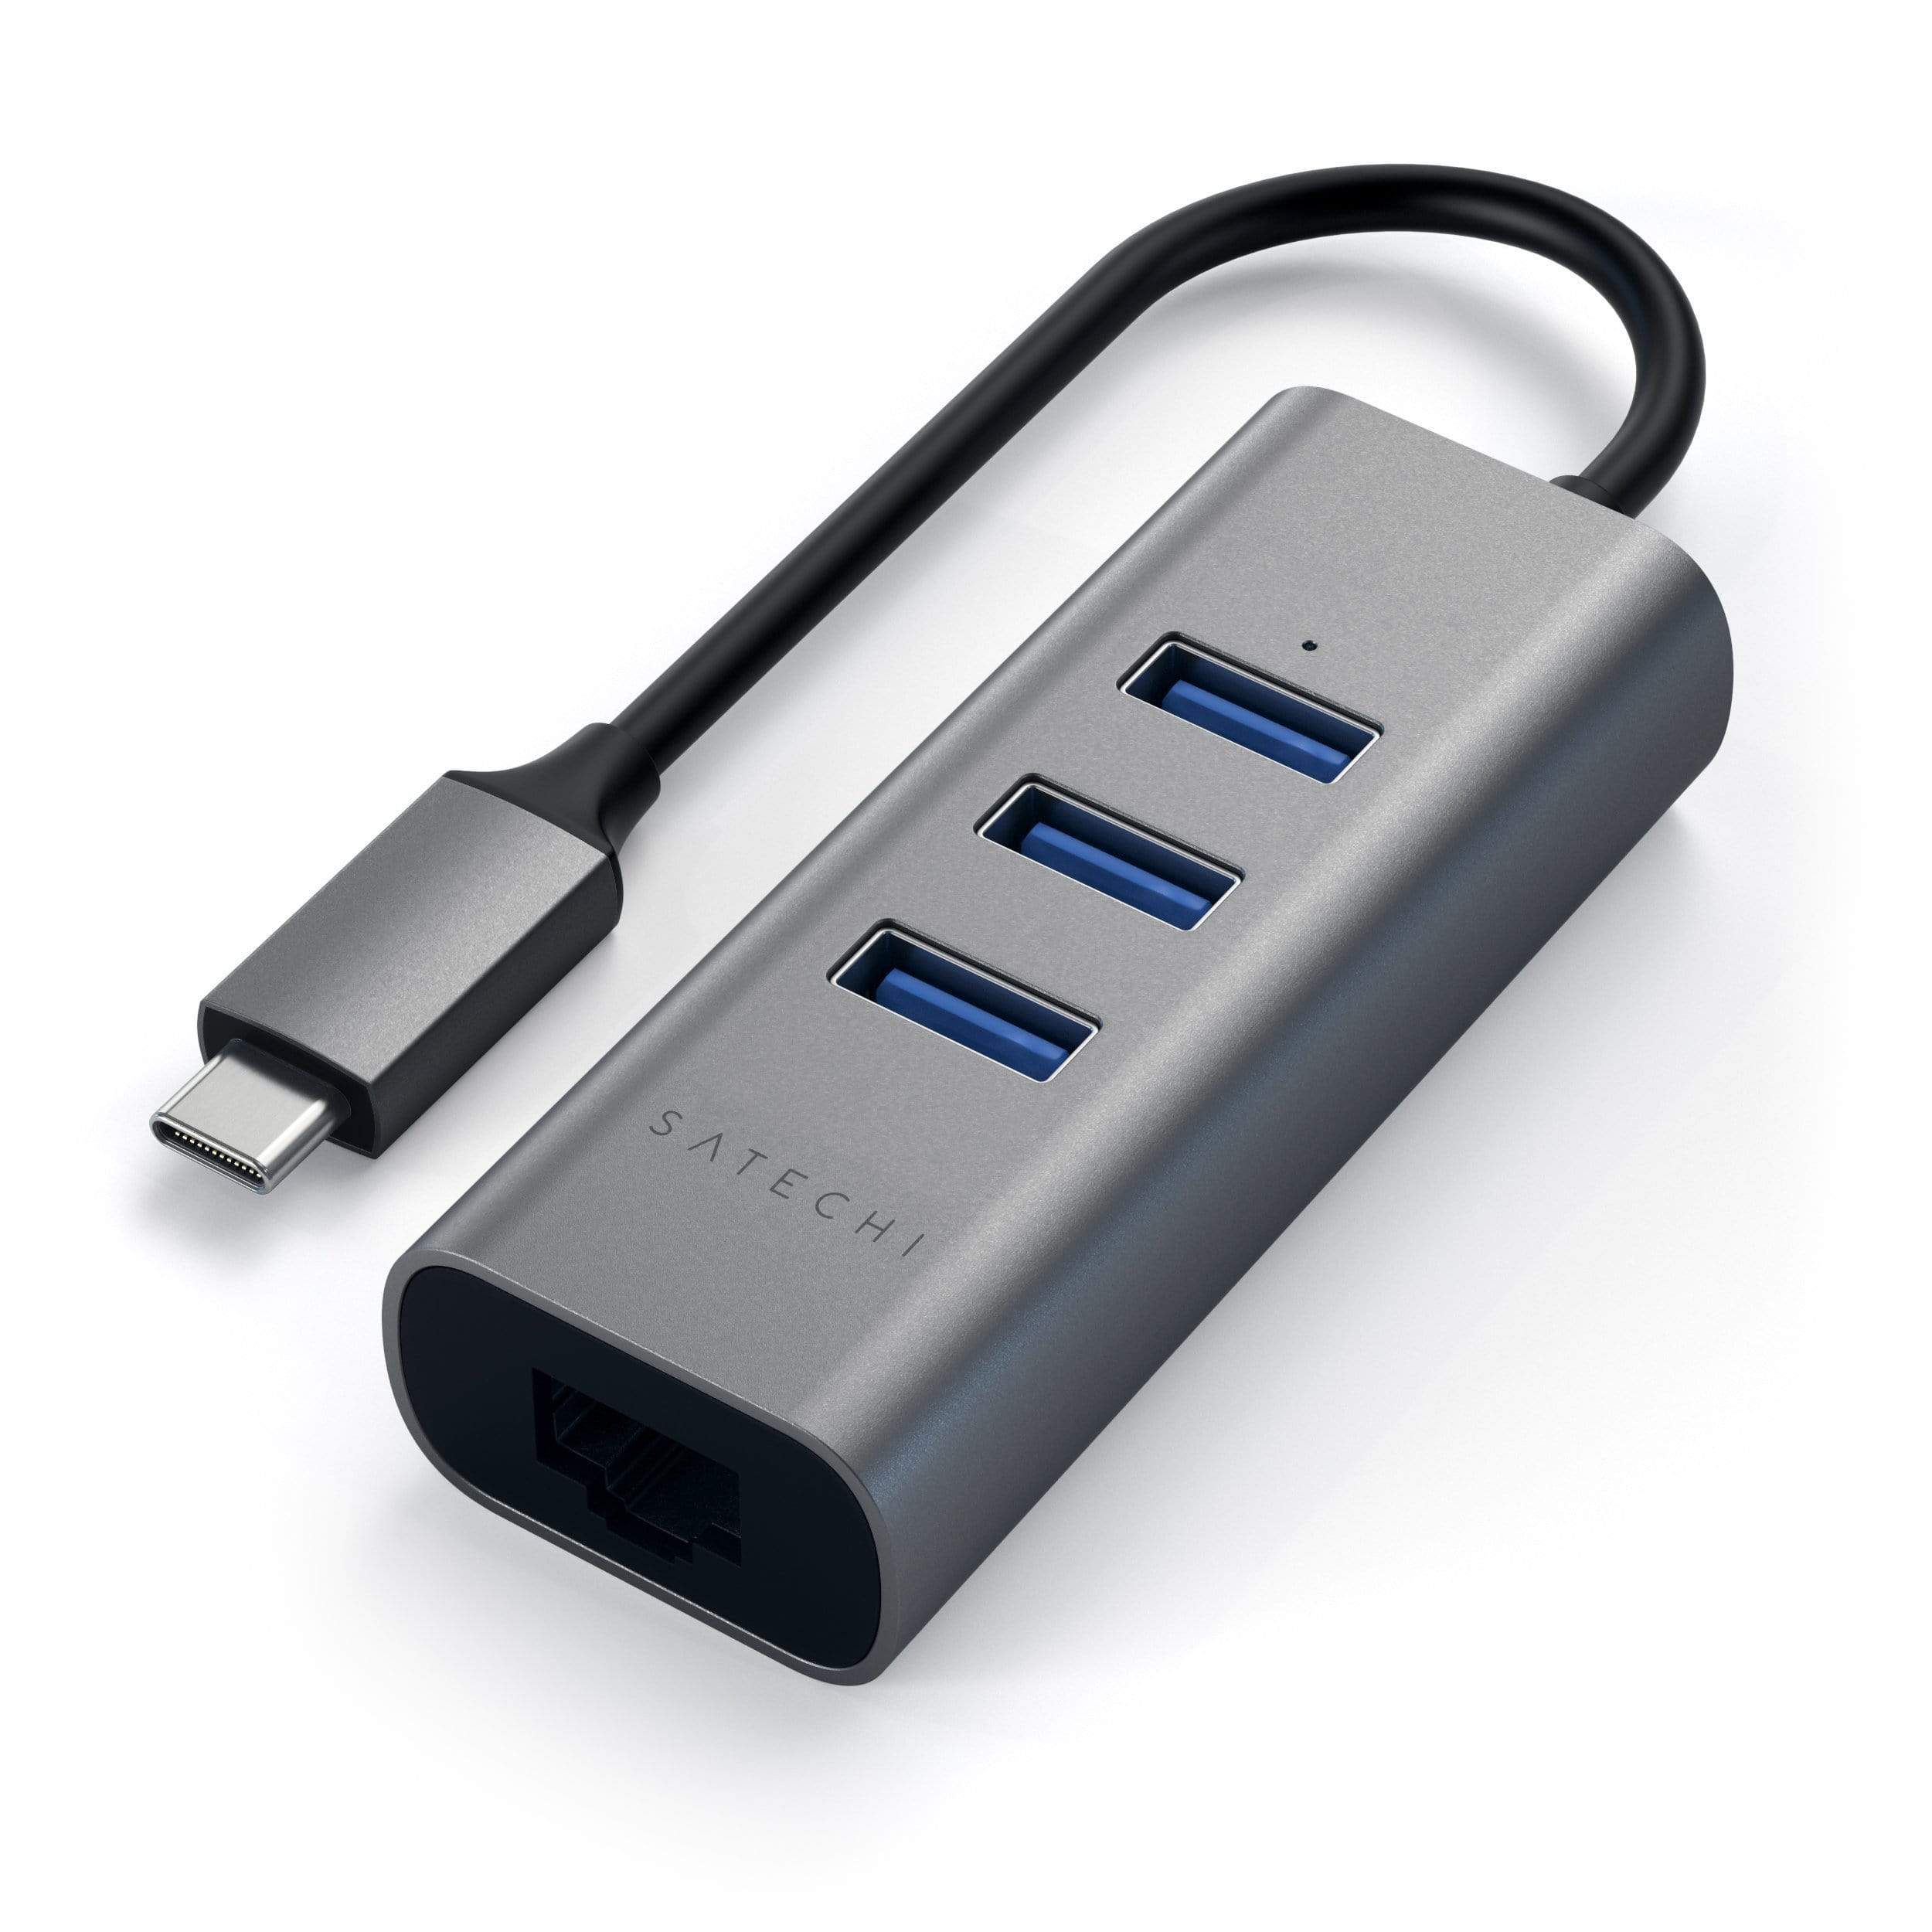 Type-C 2-in-1 Aluminum USB Hub with Ethernet - Satechi